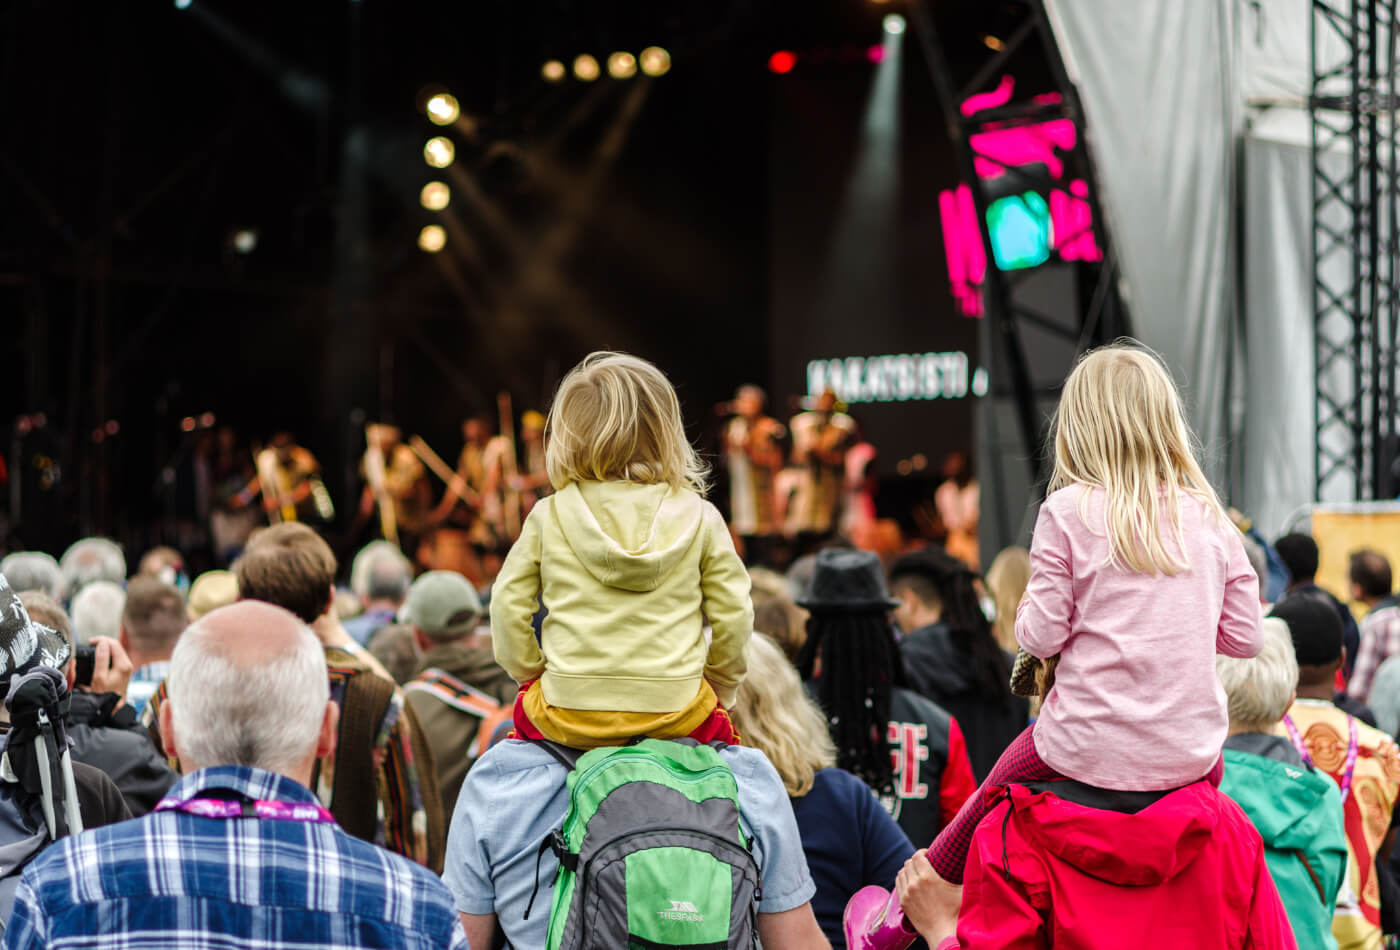 Adults watching live music with children on shoulders.